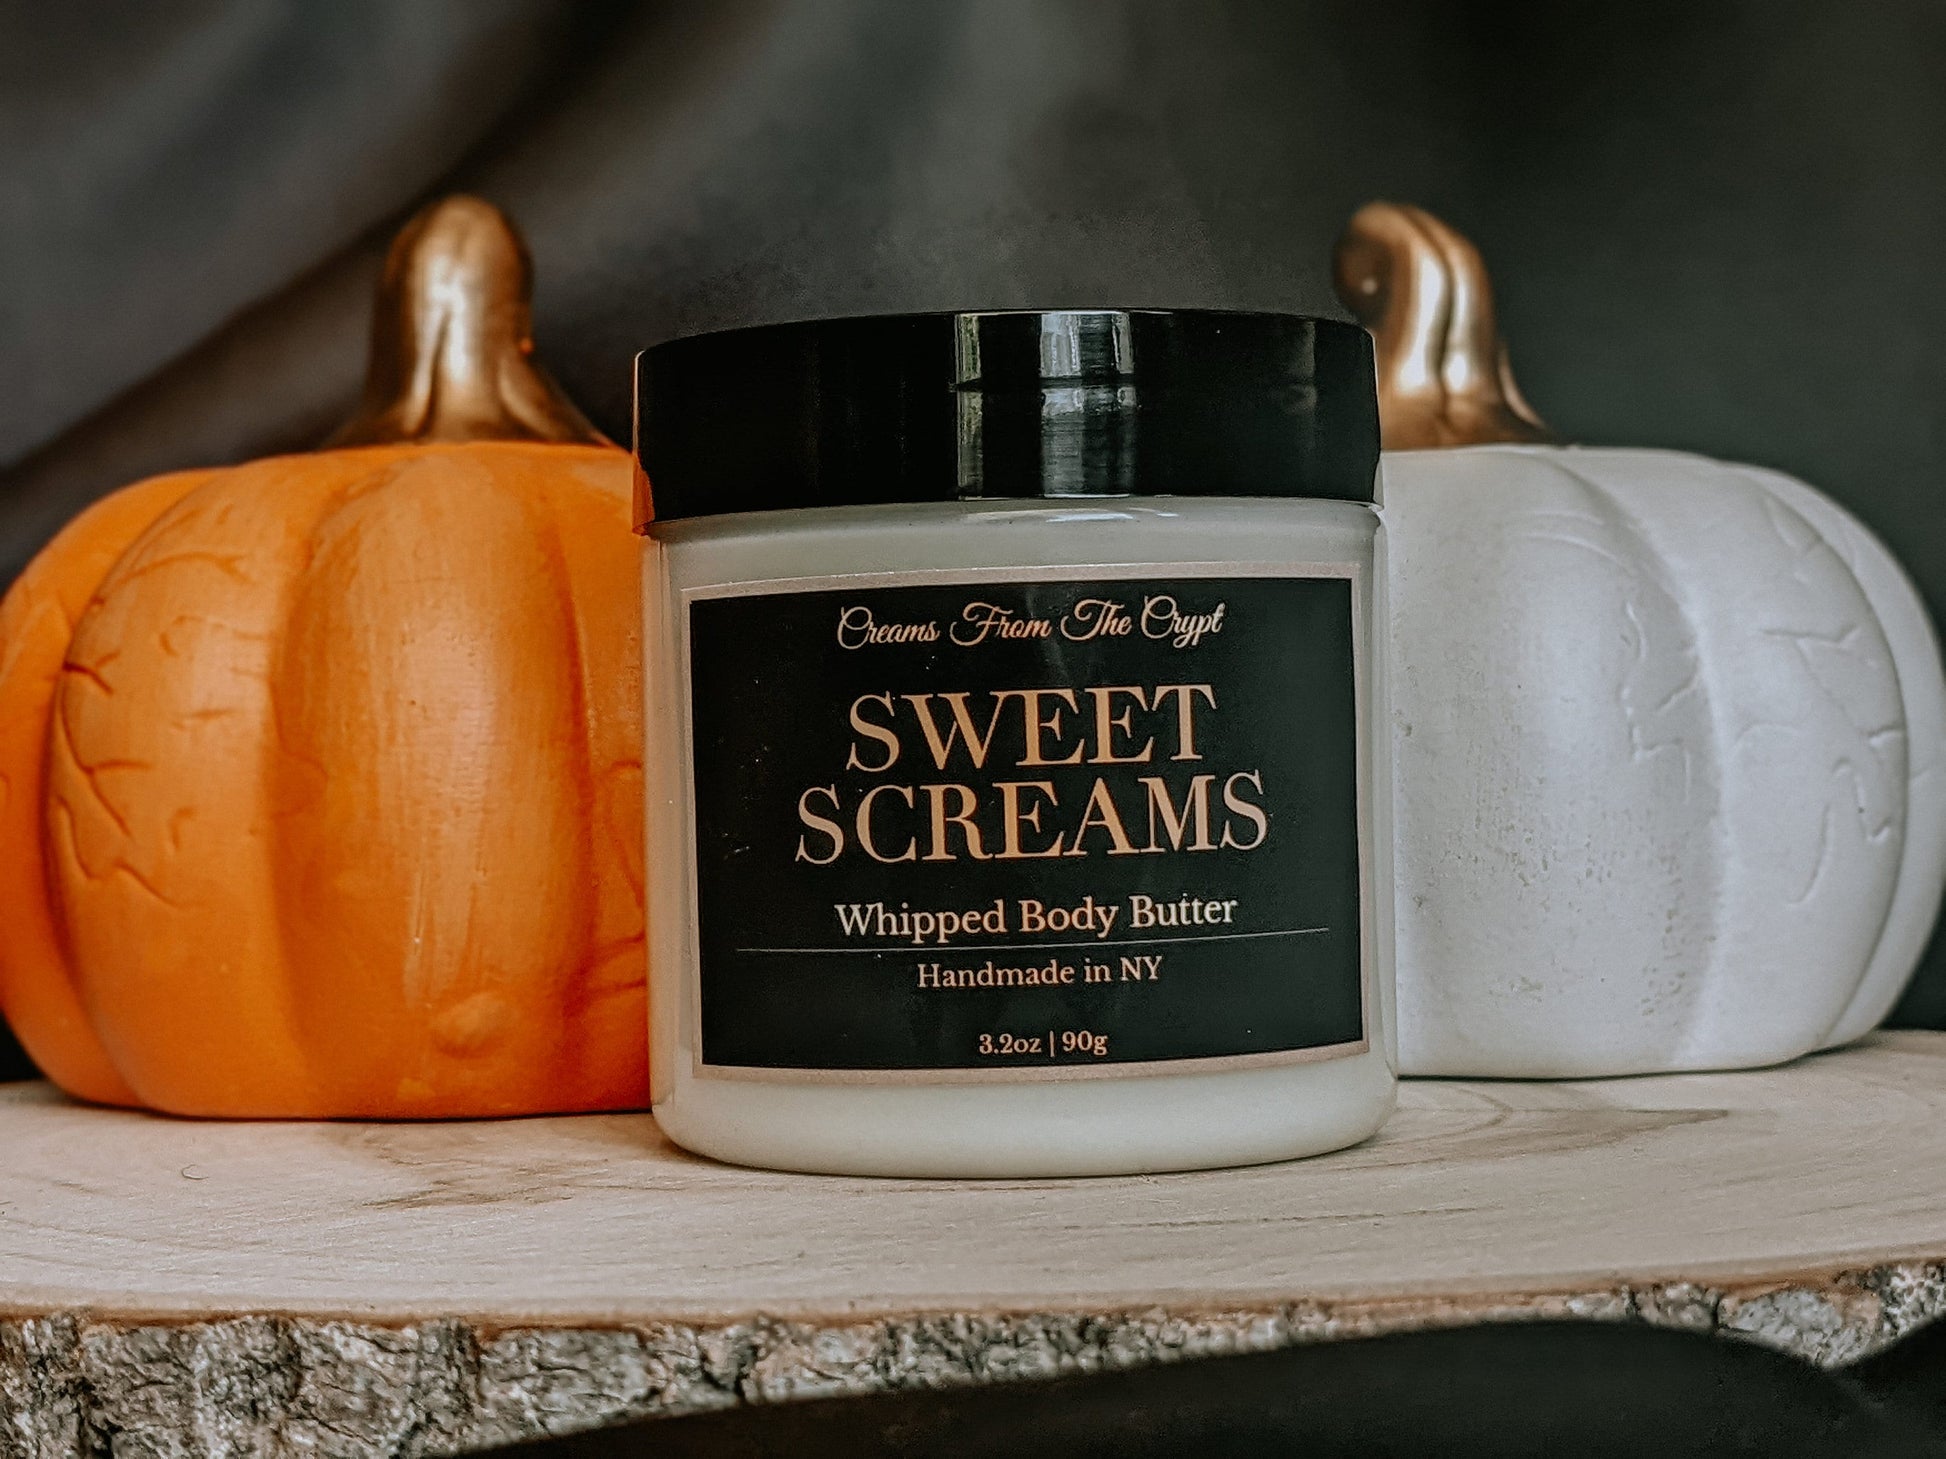 SWEET SCREAMS - Pumpkin Cheesecake scented, Vegan whipped body butter, Shea, mango butter, moisturizer, gothic skincare, fall/food fragrance